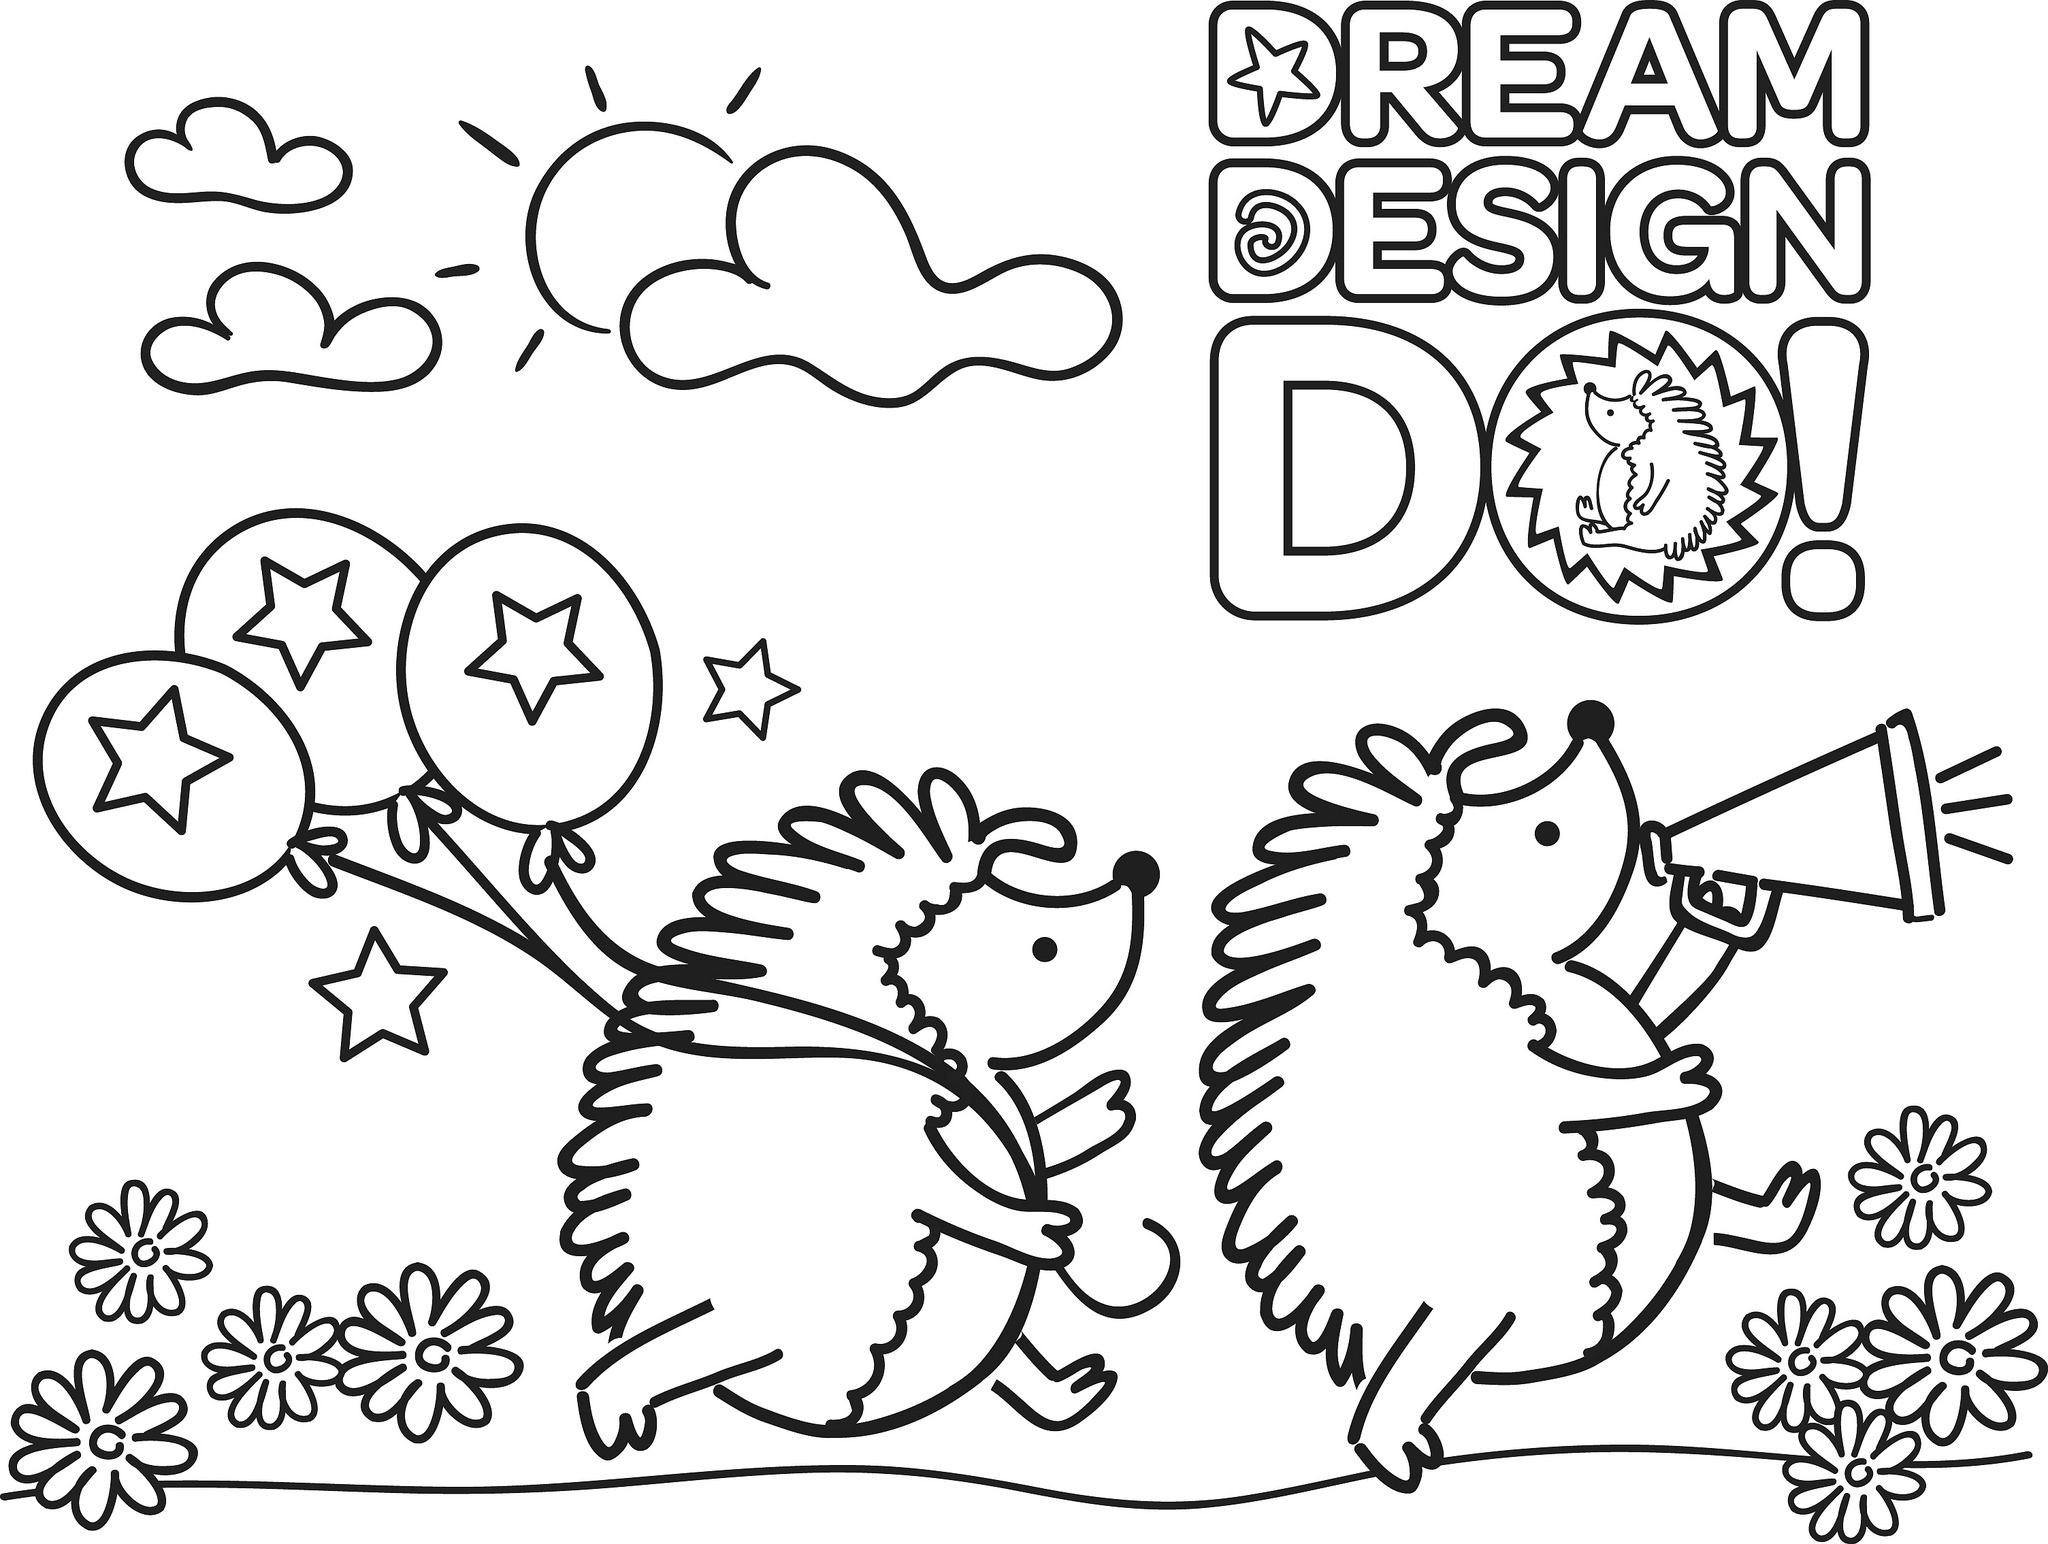 Girl Scout Cookies Coloring Pages
 ABC Baker cookie coloring sheet